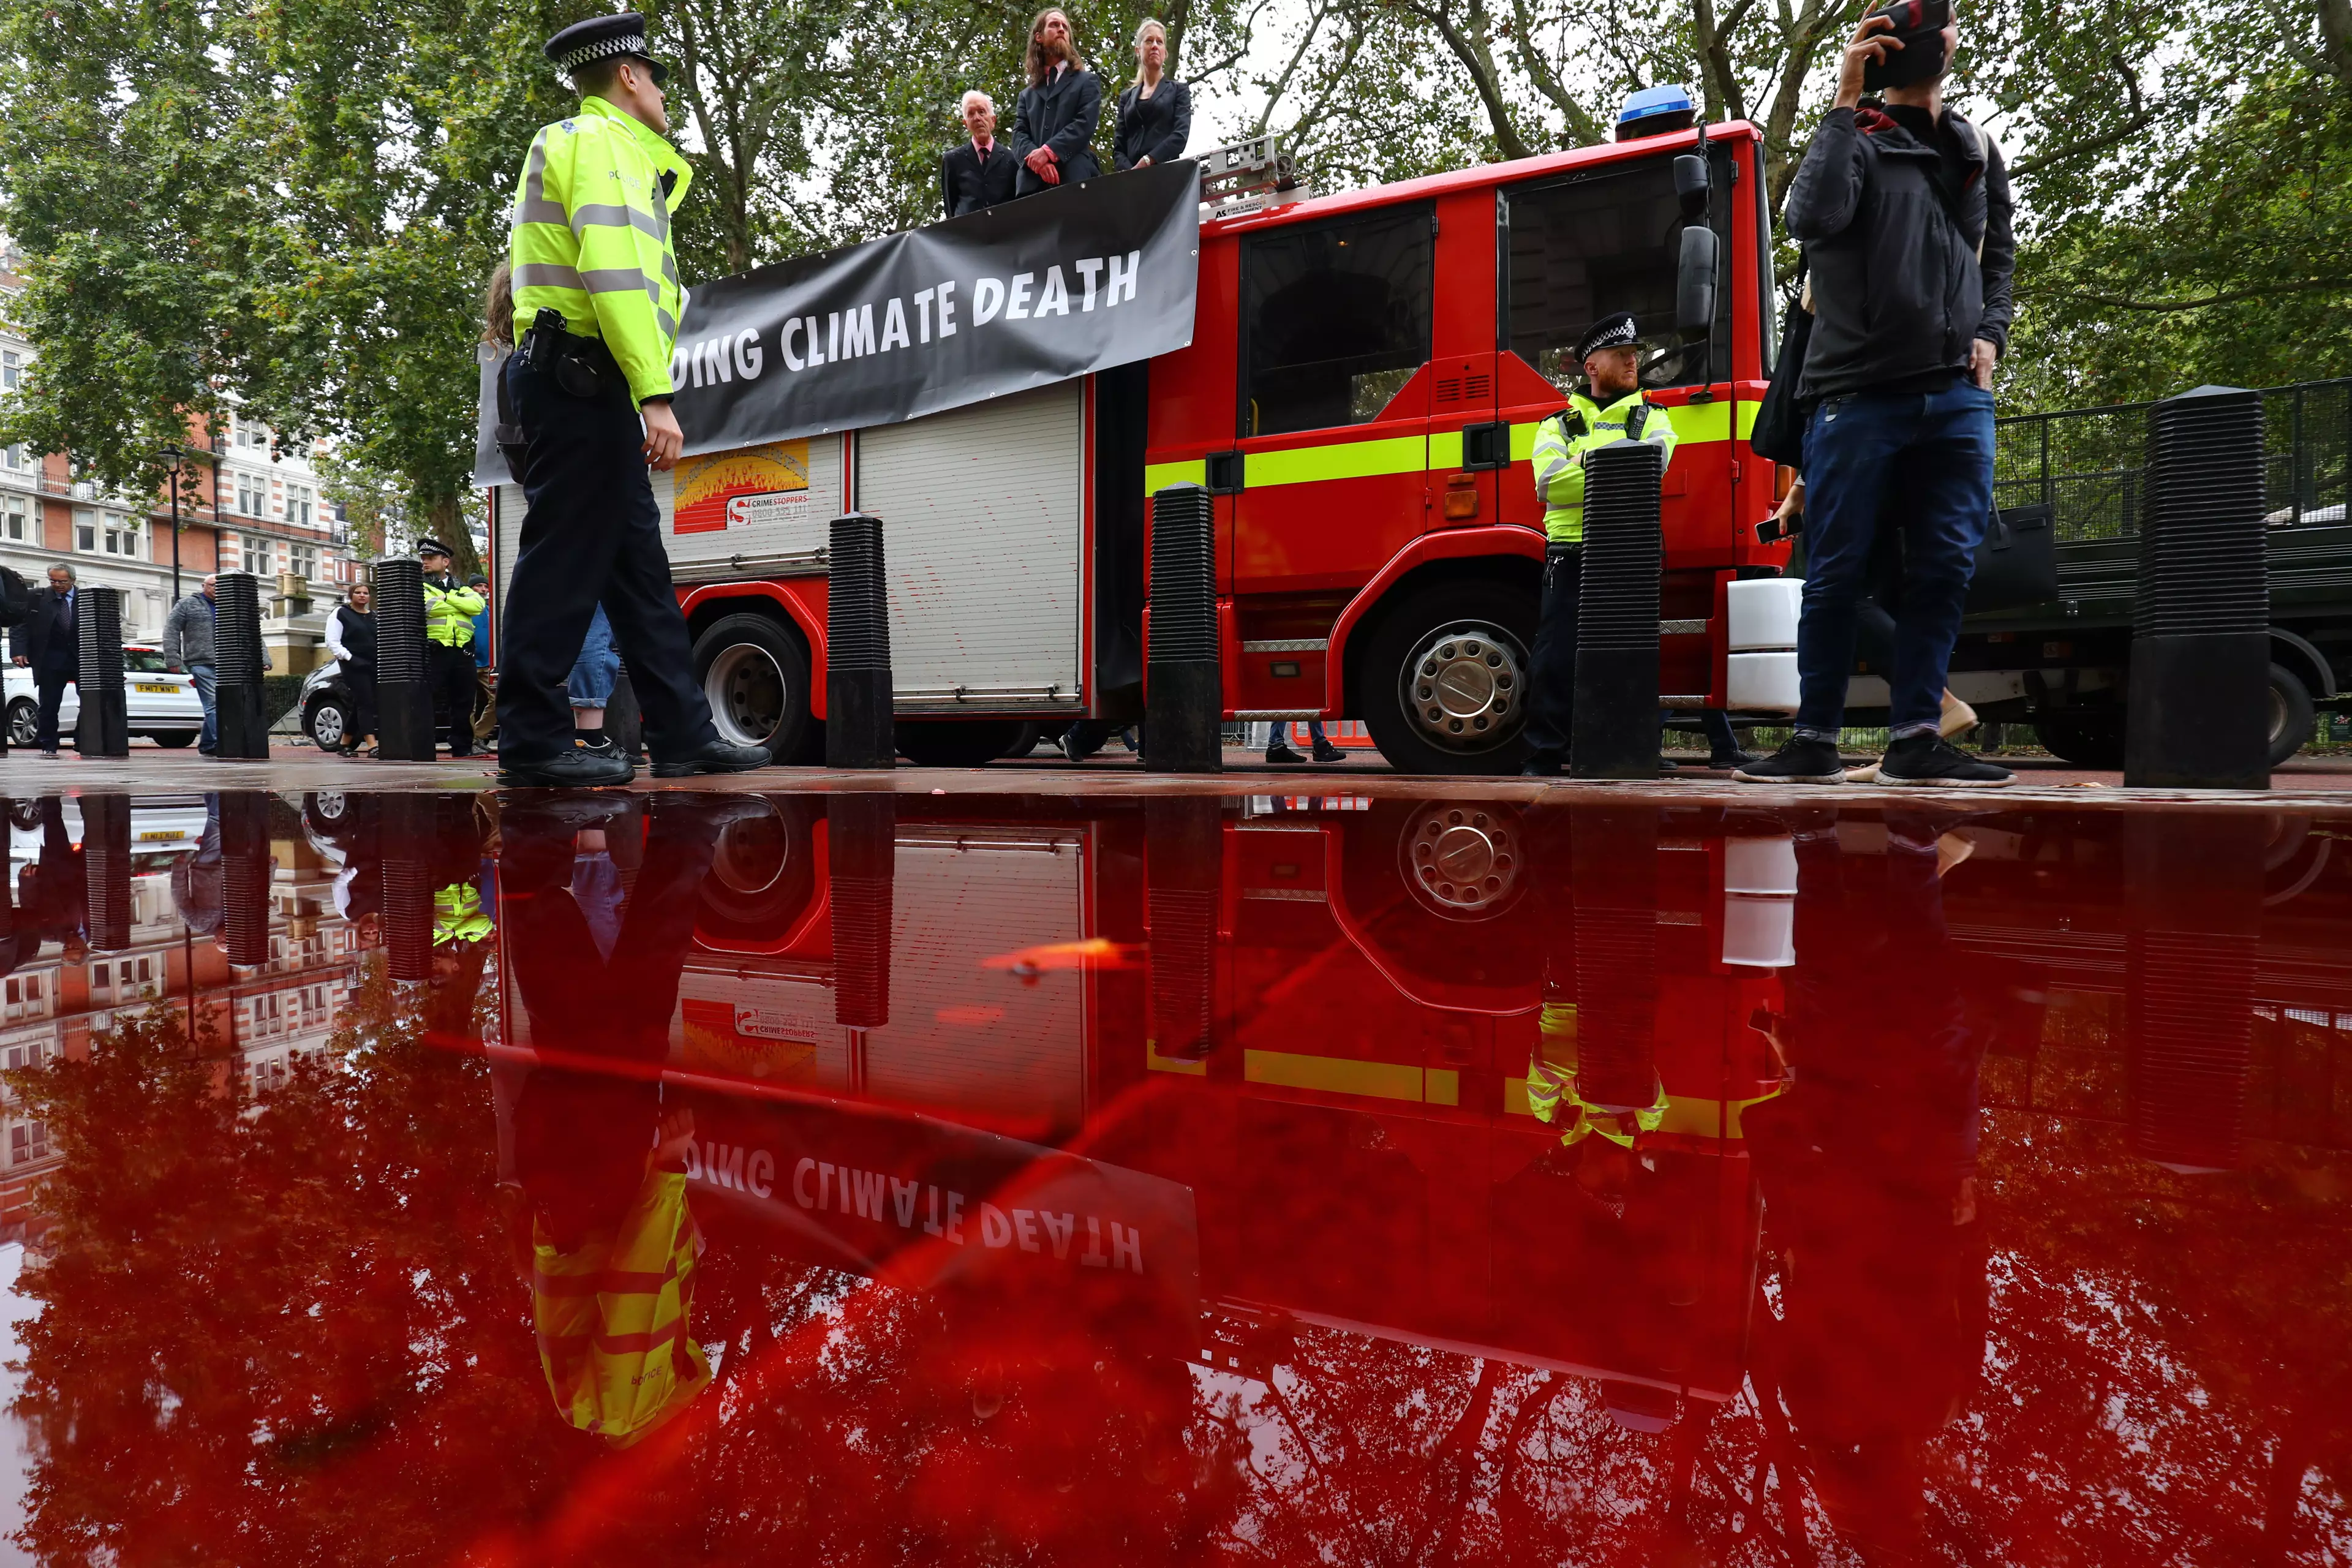 Extinction Rebellion protesters sprayed 1,800 litres of fake blood from a fire engine.